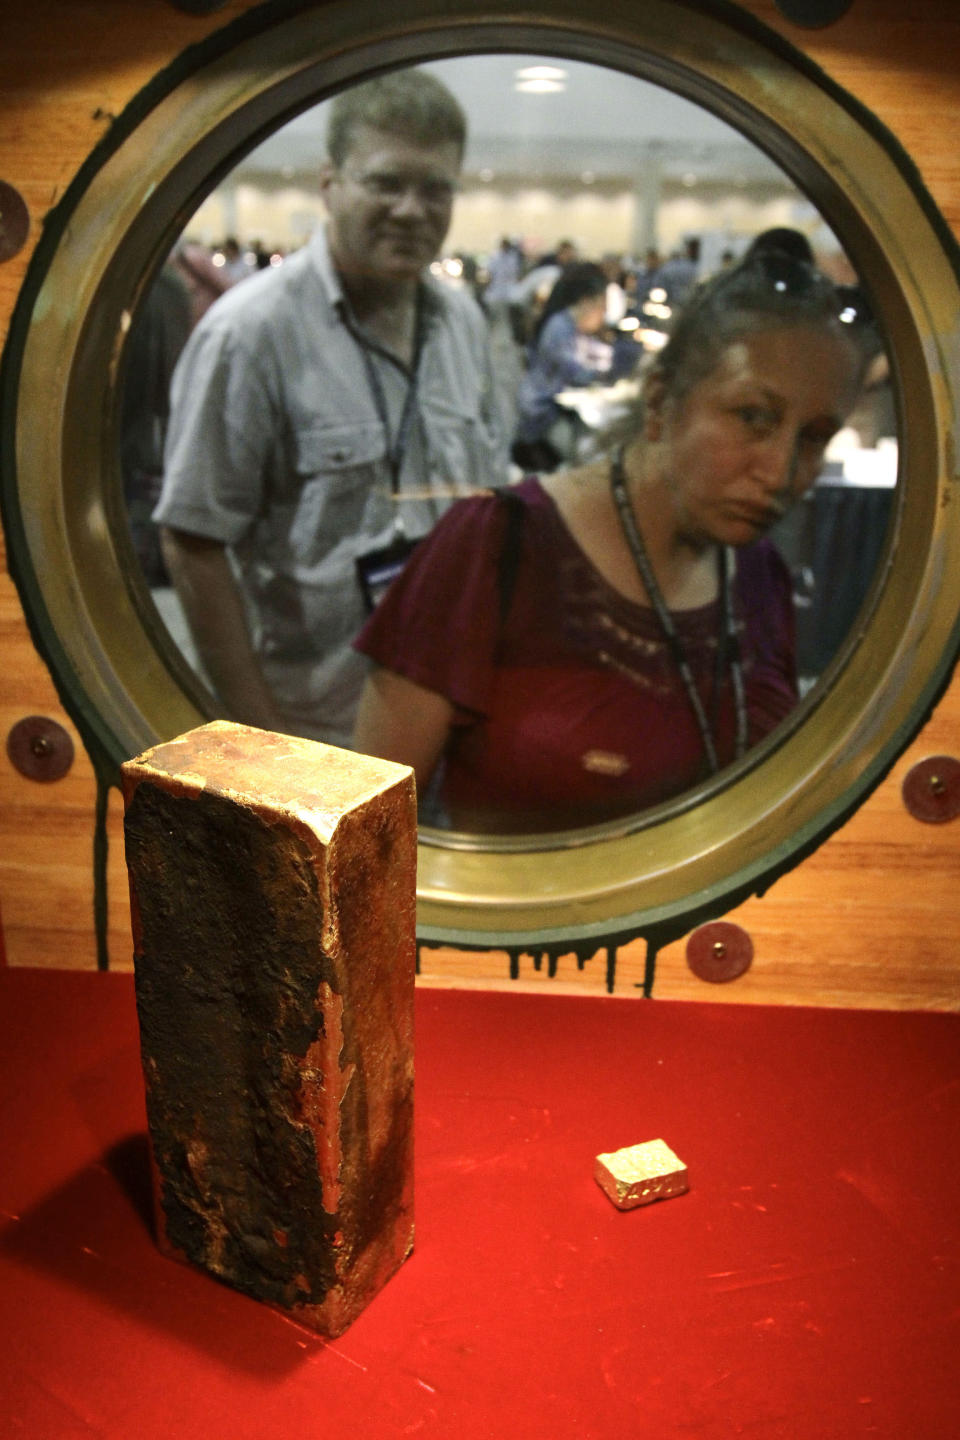 In this Aug. 10, 2010 photo, coin collector Darlene Corio, of Rochester, N.Y., right, peers through a circular window at a gold ingot weighing more than 662 ounces as her husband, Tim Corio, left, looks on at a display at the World's Fair of Money in Boston. The ingot was among two tons of California Gold Rush gold recovered from the shipwreck of the S.S. Central America which sank in 1857. (AP Photo/Steven Senne)